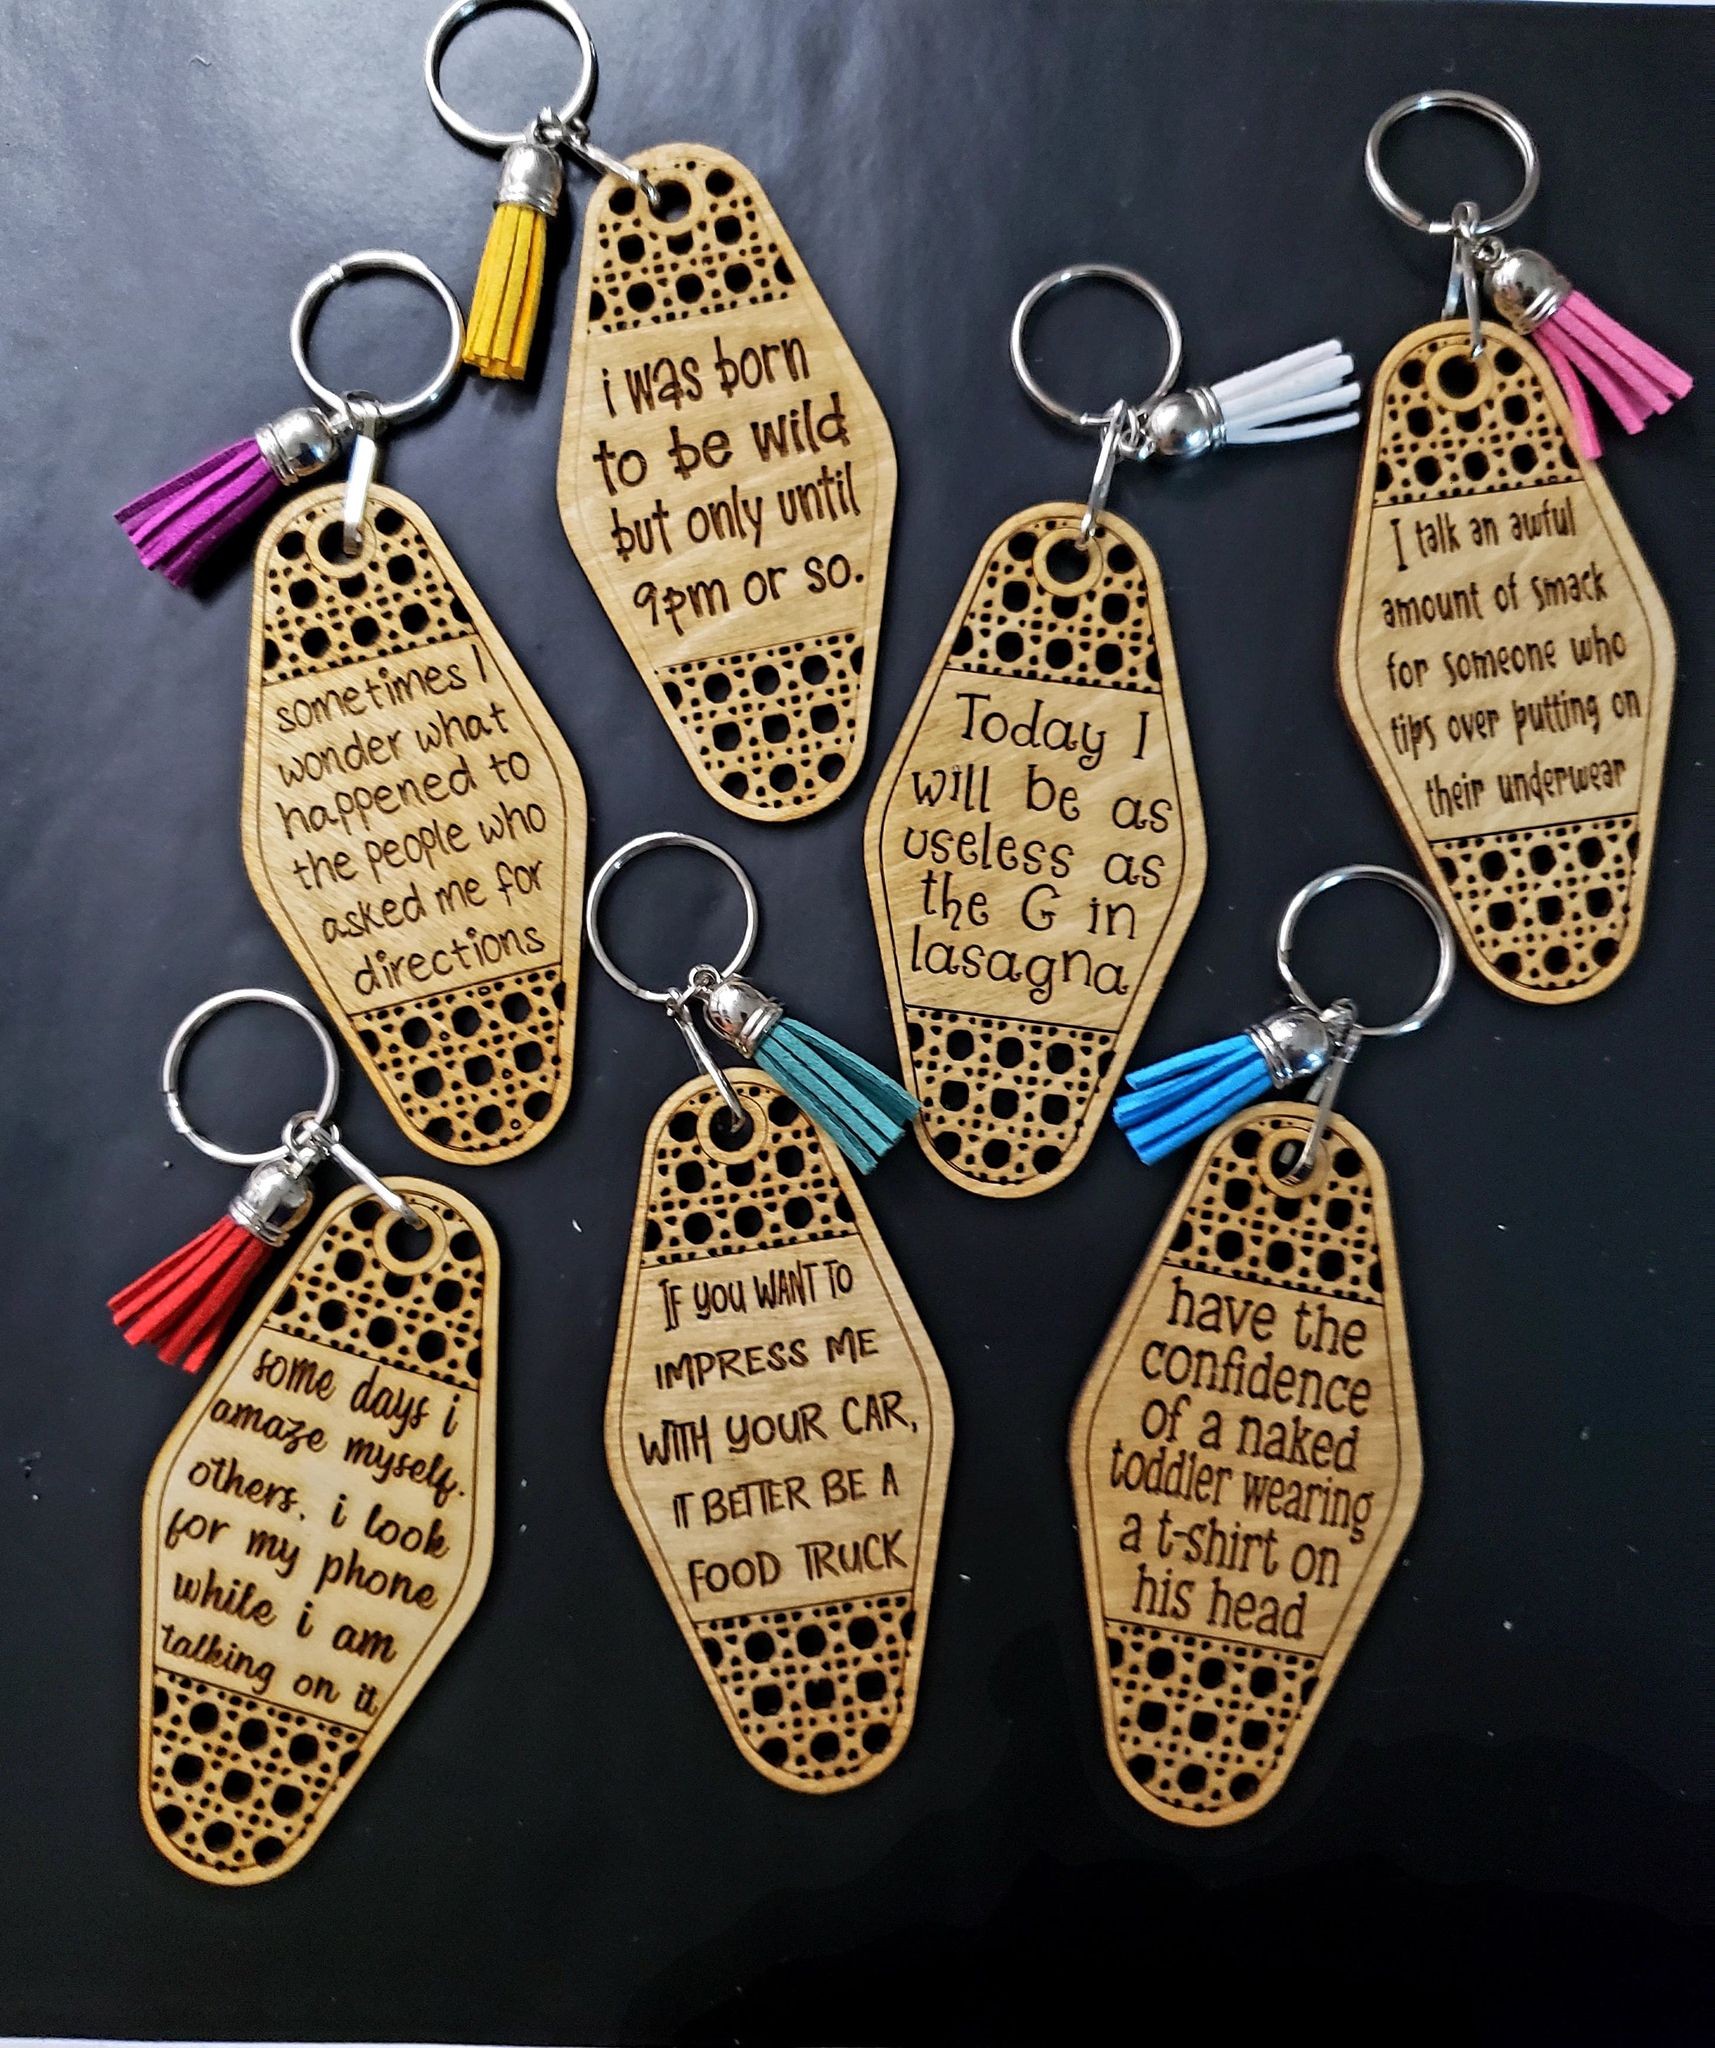 Check out these charming Retro style Hotel Keychains, featuring a rattan weave and comical sayings. With dimensions of approx. 4" x 2" (not counting the clip and ring), each Keychain comes with a complementary tassel attached. The Keychains are crafted from Baltic Birch and the varying colors of the tassels make for an interesting contrast. Ships in 5 to 7 days.